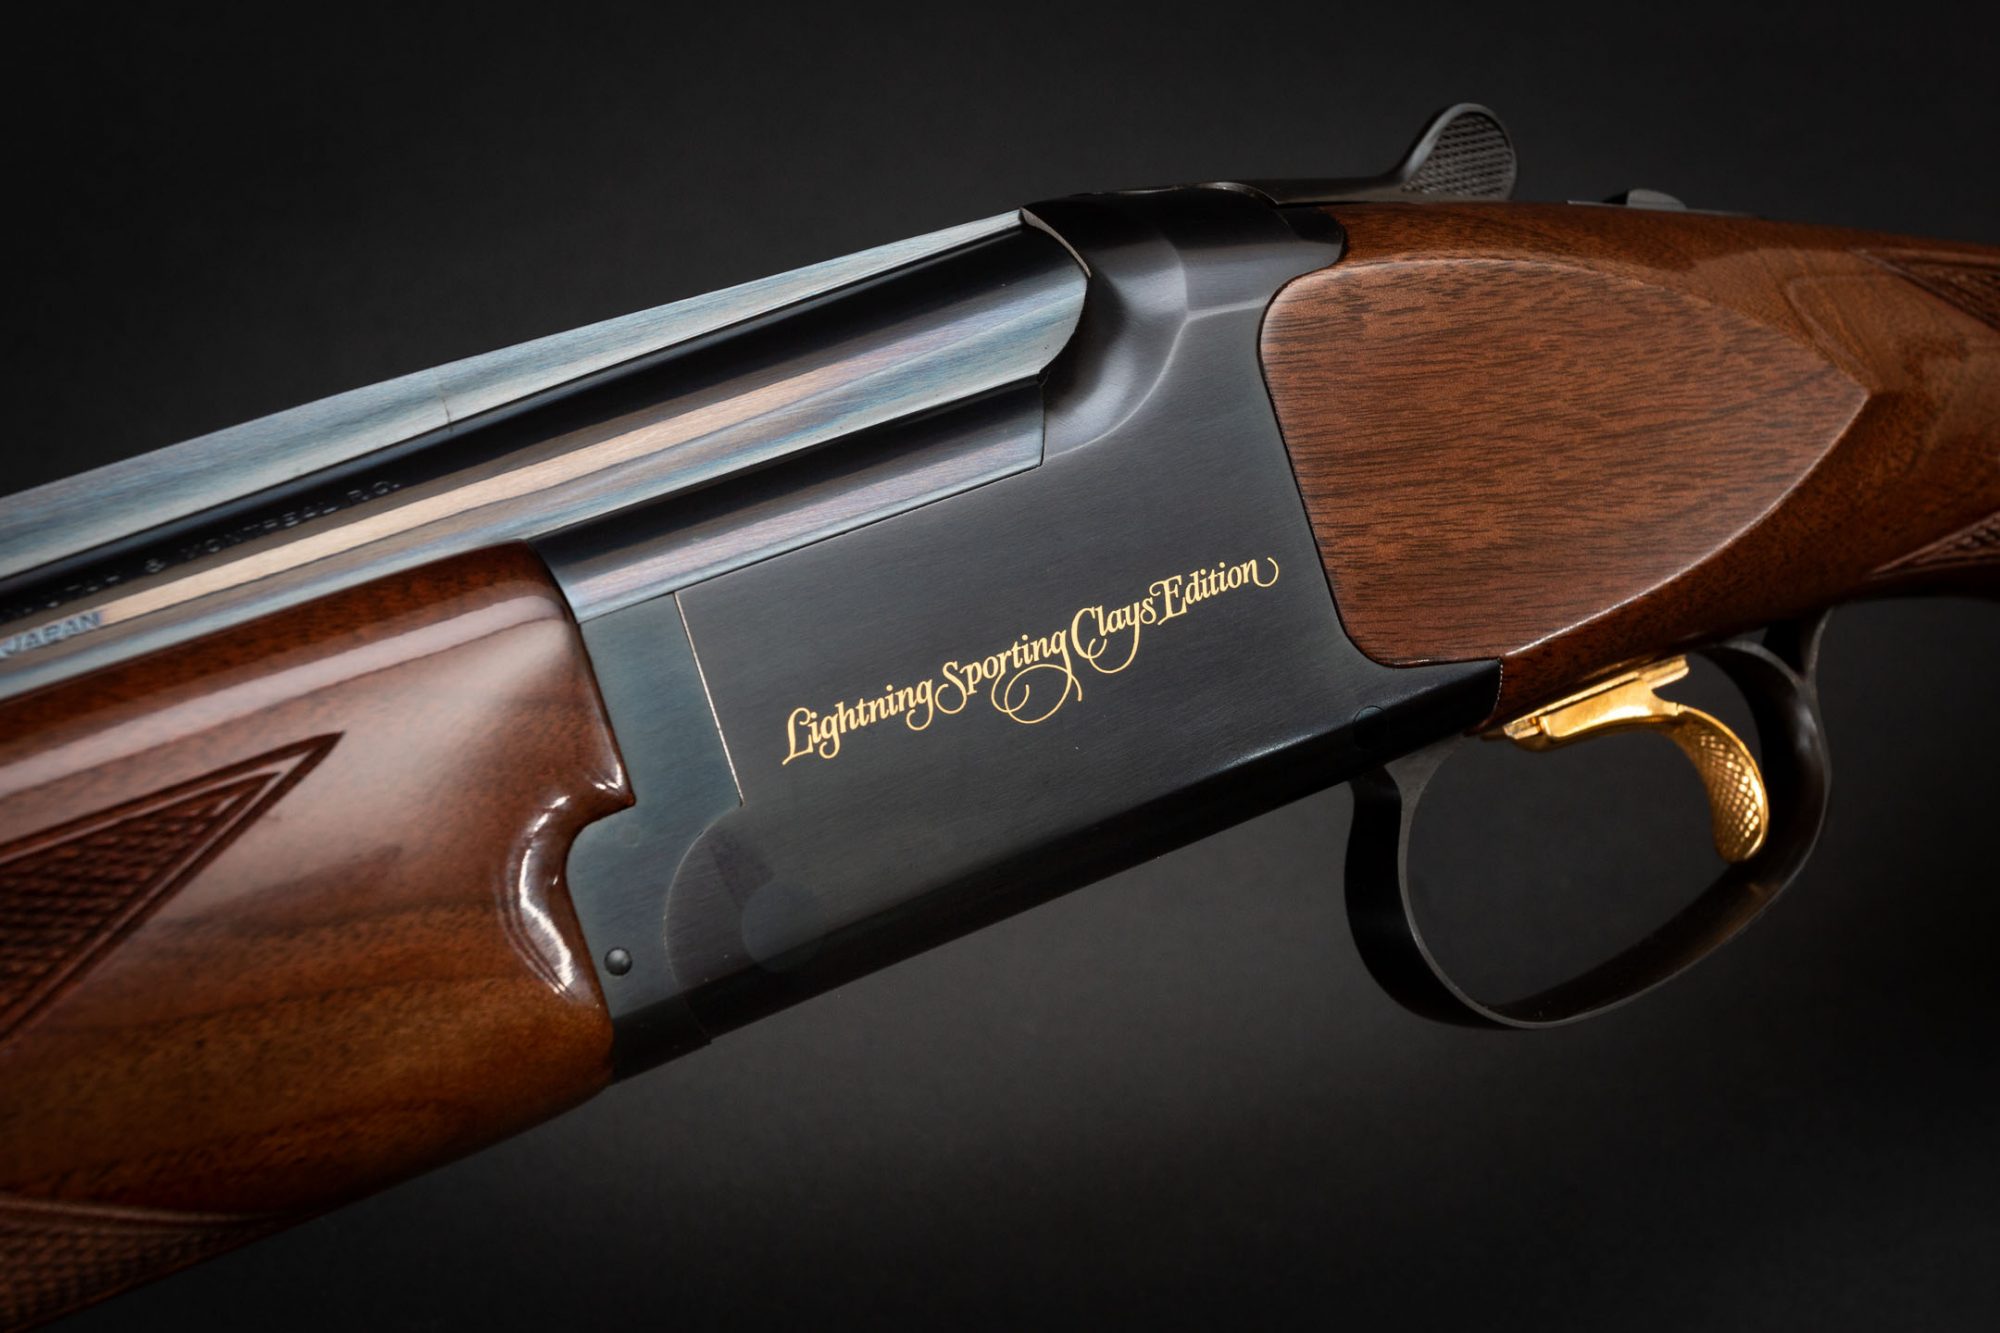 Browning Citori Lightning Sporting Clays Edition 12 gauge shotgun, for sale by Turnbull Restoration Co. of Bloomfield, NY